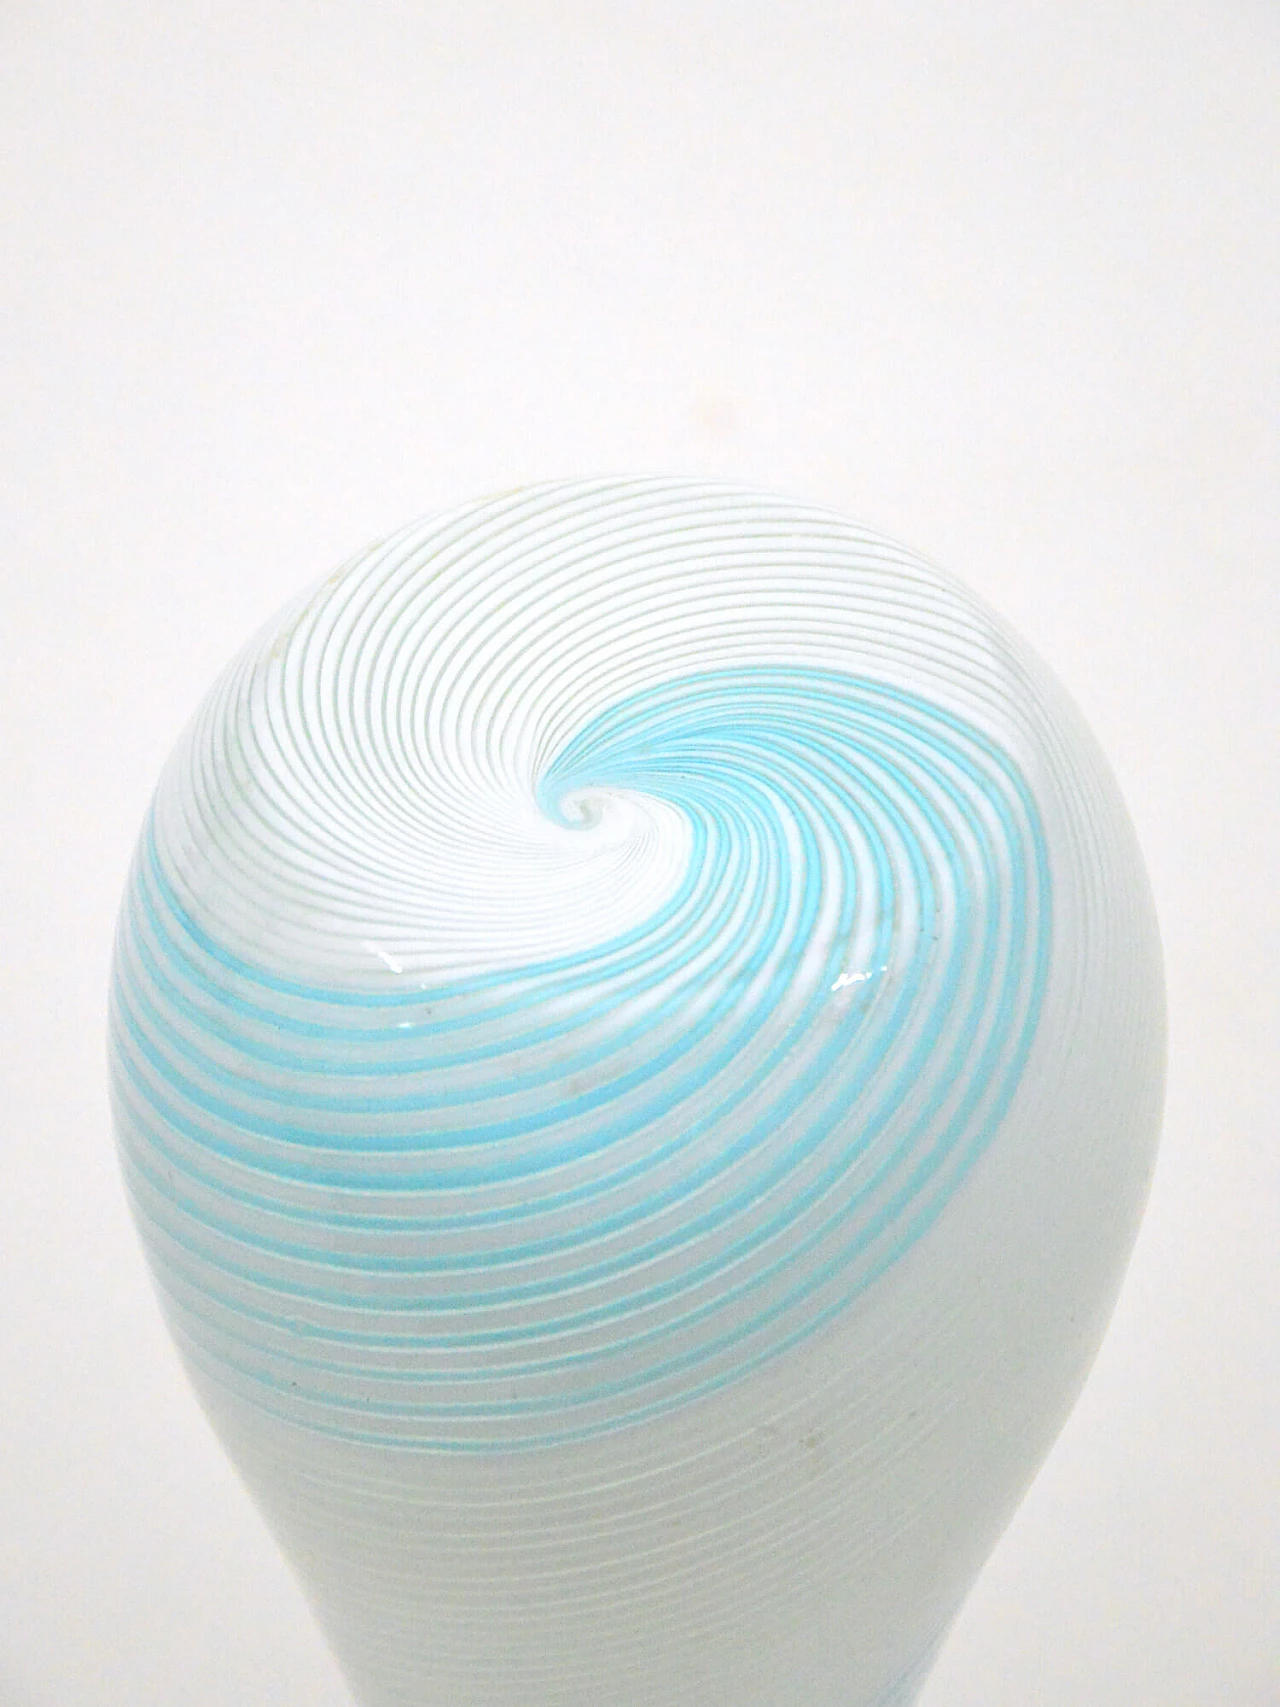 Murano glass vase by Dino Martens for Aureliano Toso, 1950s 8